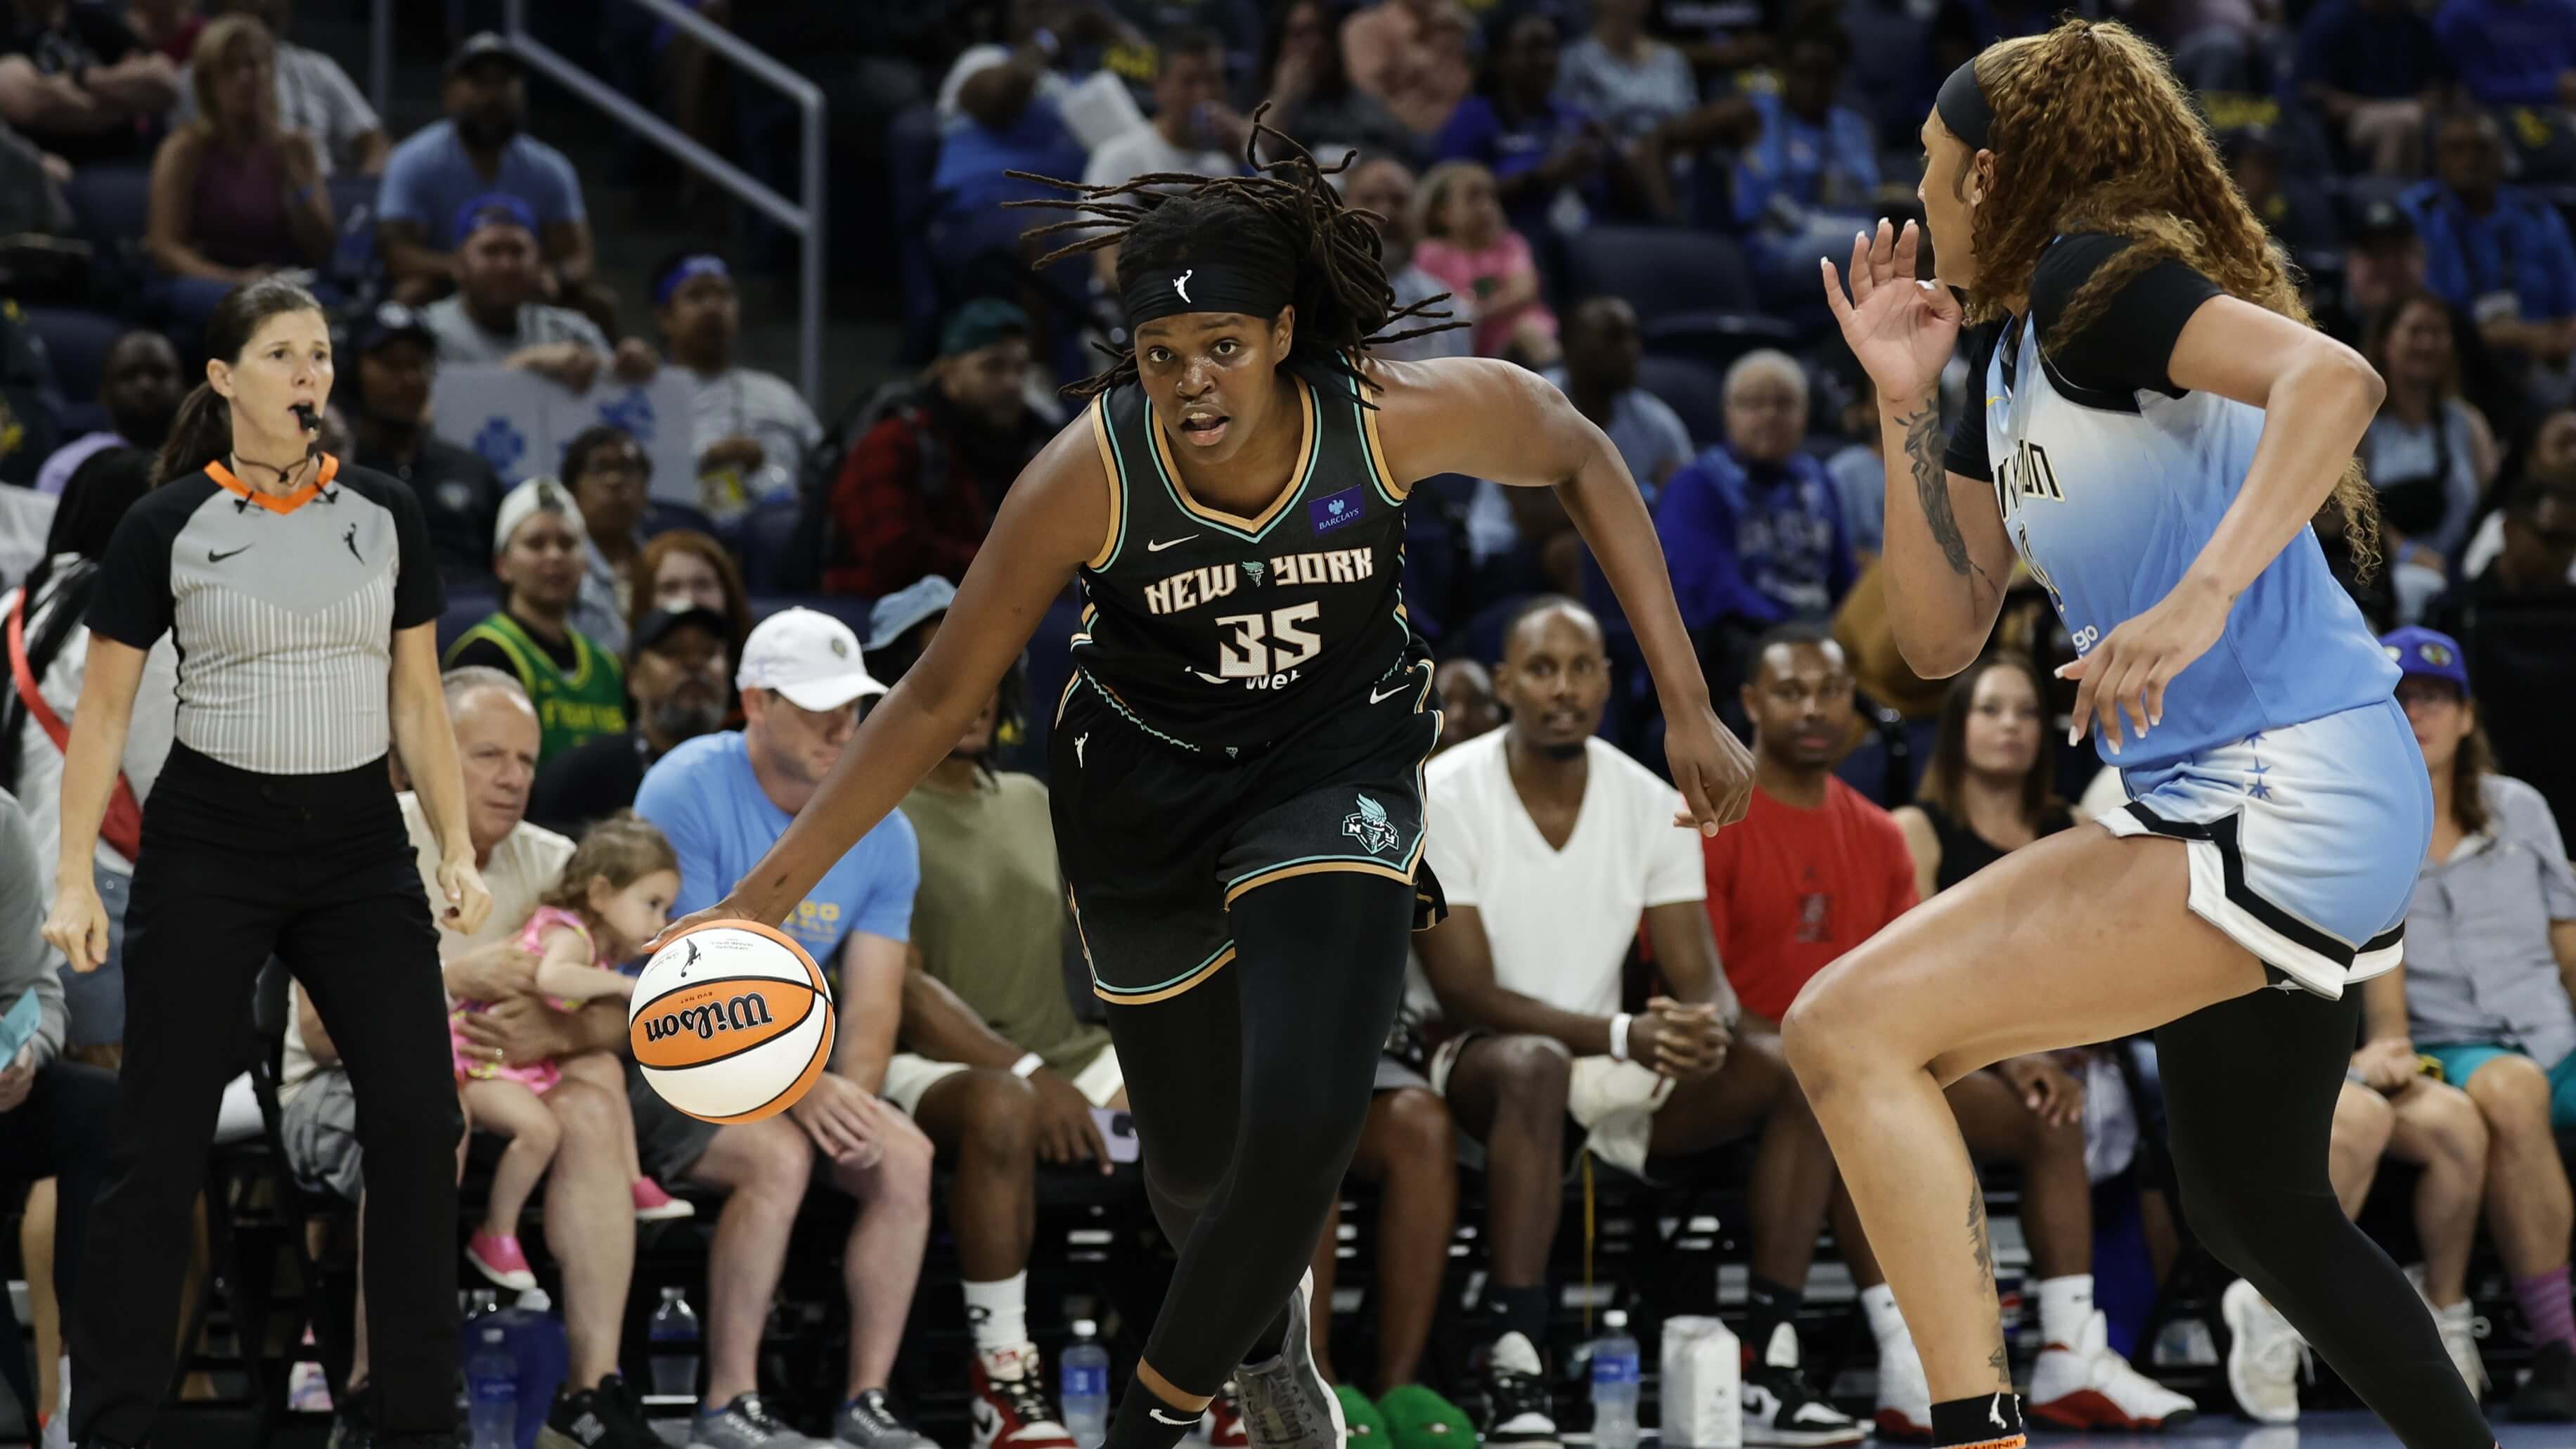 How To Bet - Sun vs Liberty Predictions, Picks, & Odds for Tonight’s WNBA Game